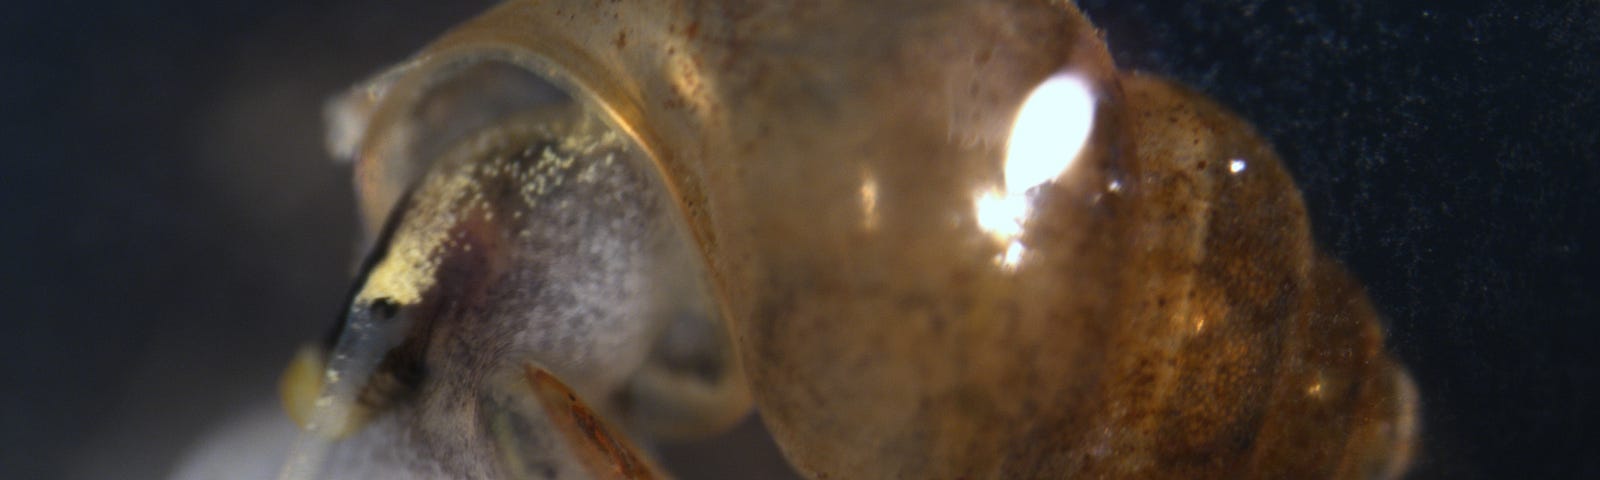 Extreme close-up of a tiny brown snail